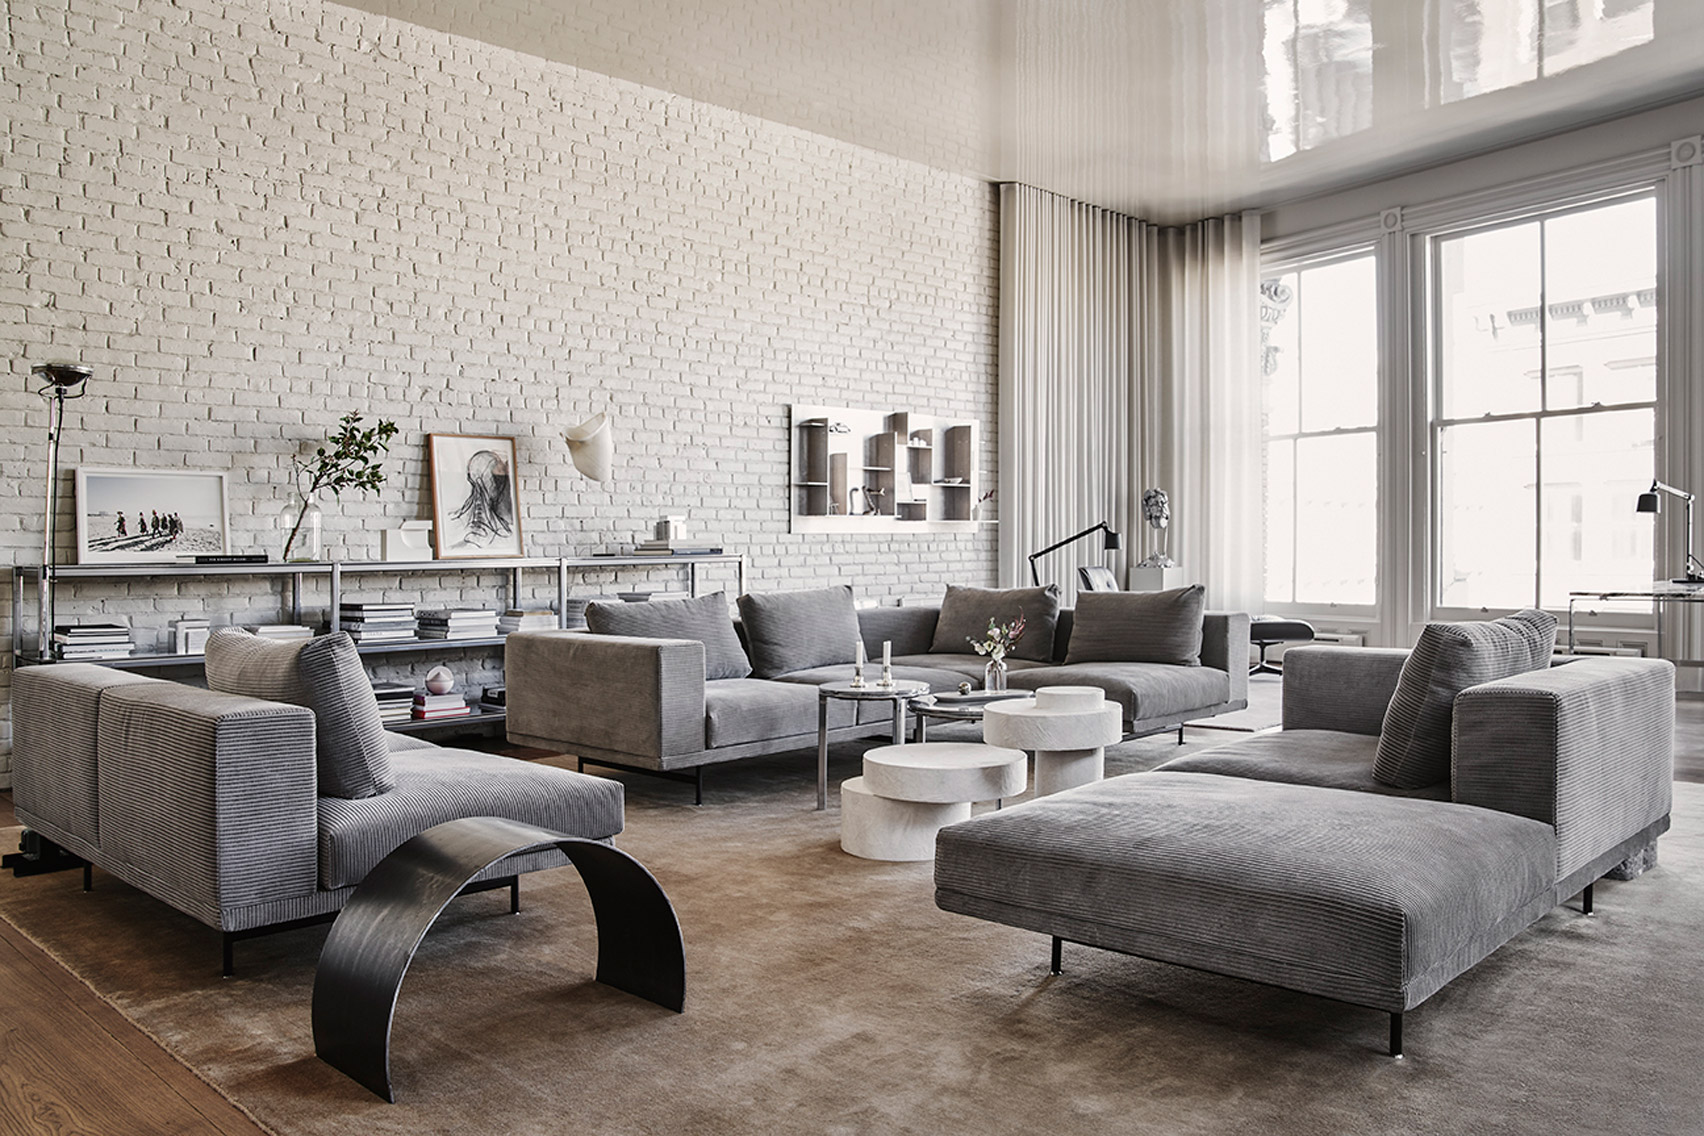 Living room with Vipp furniture